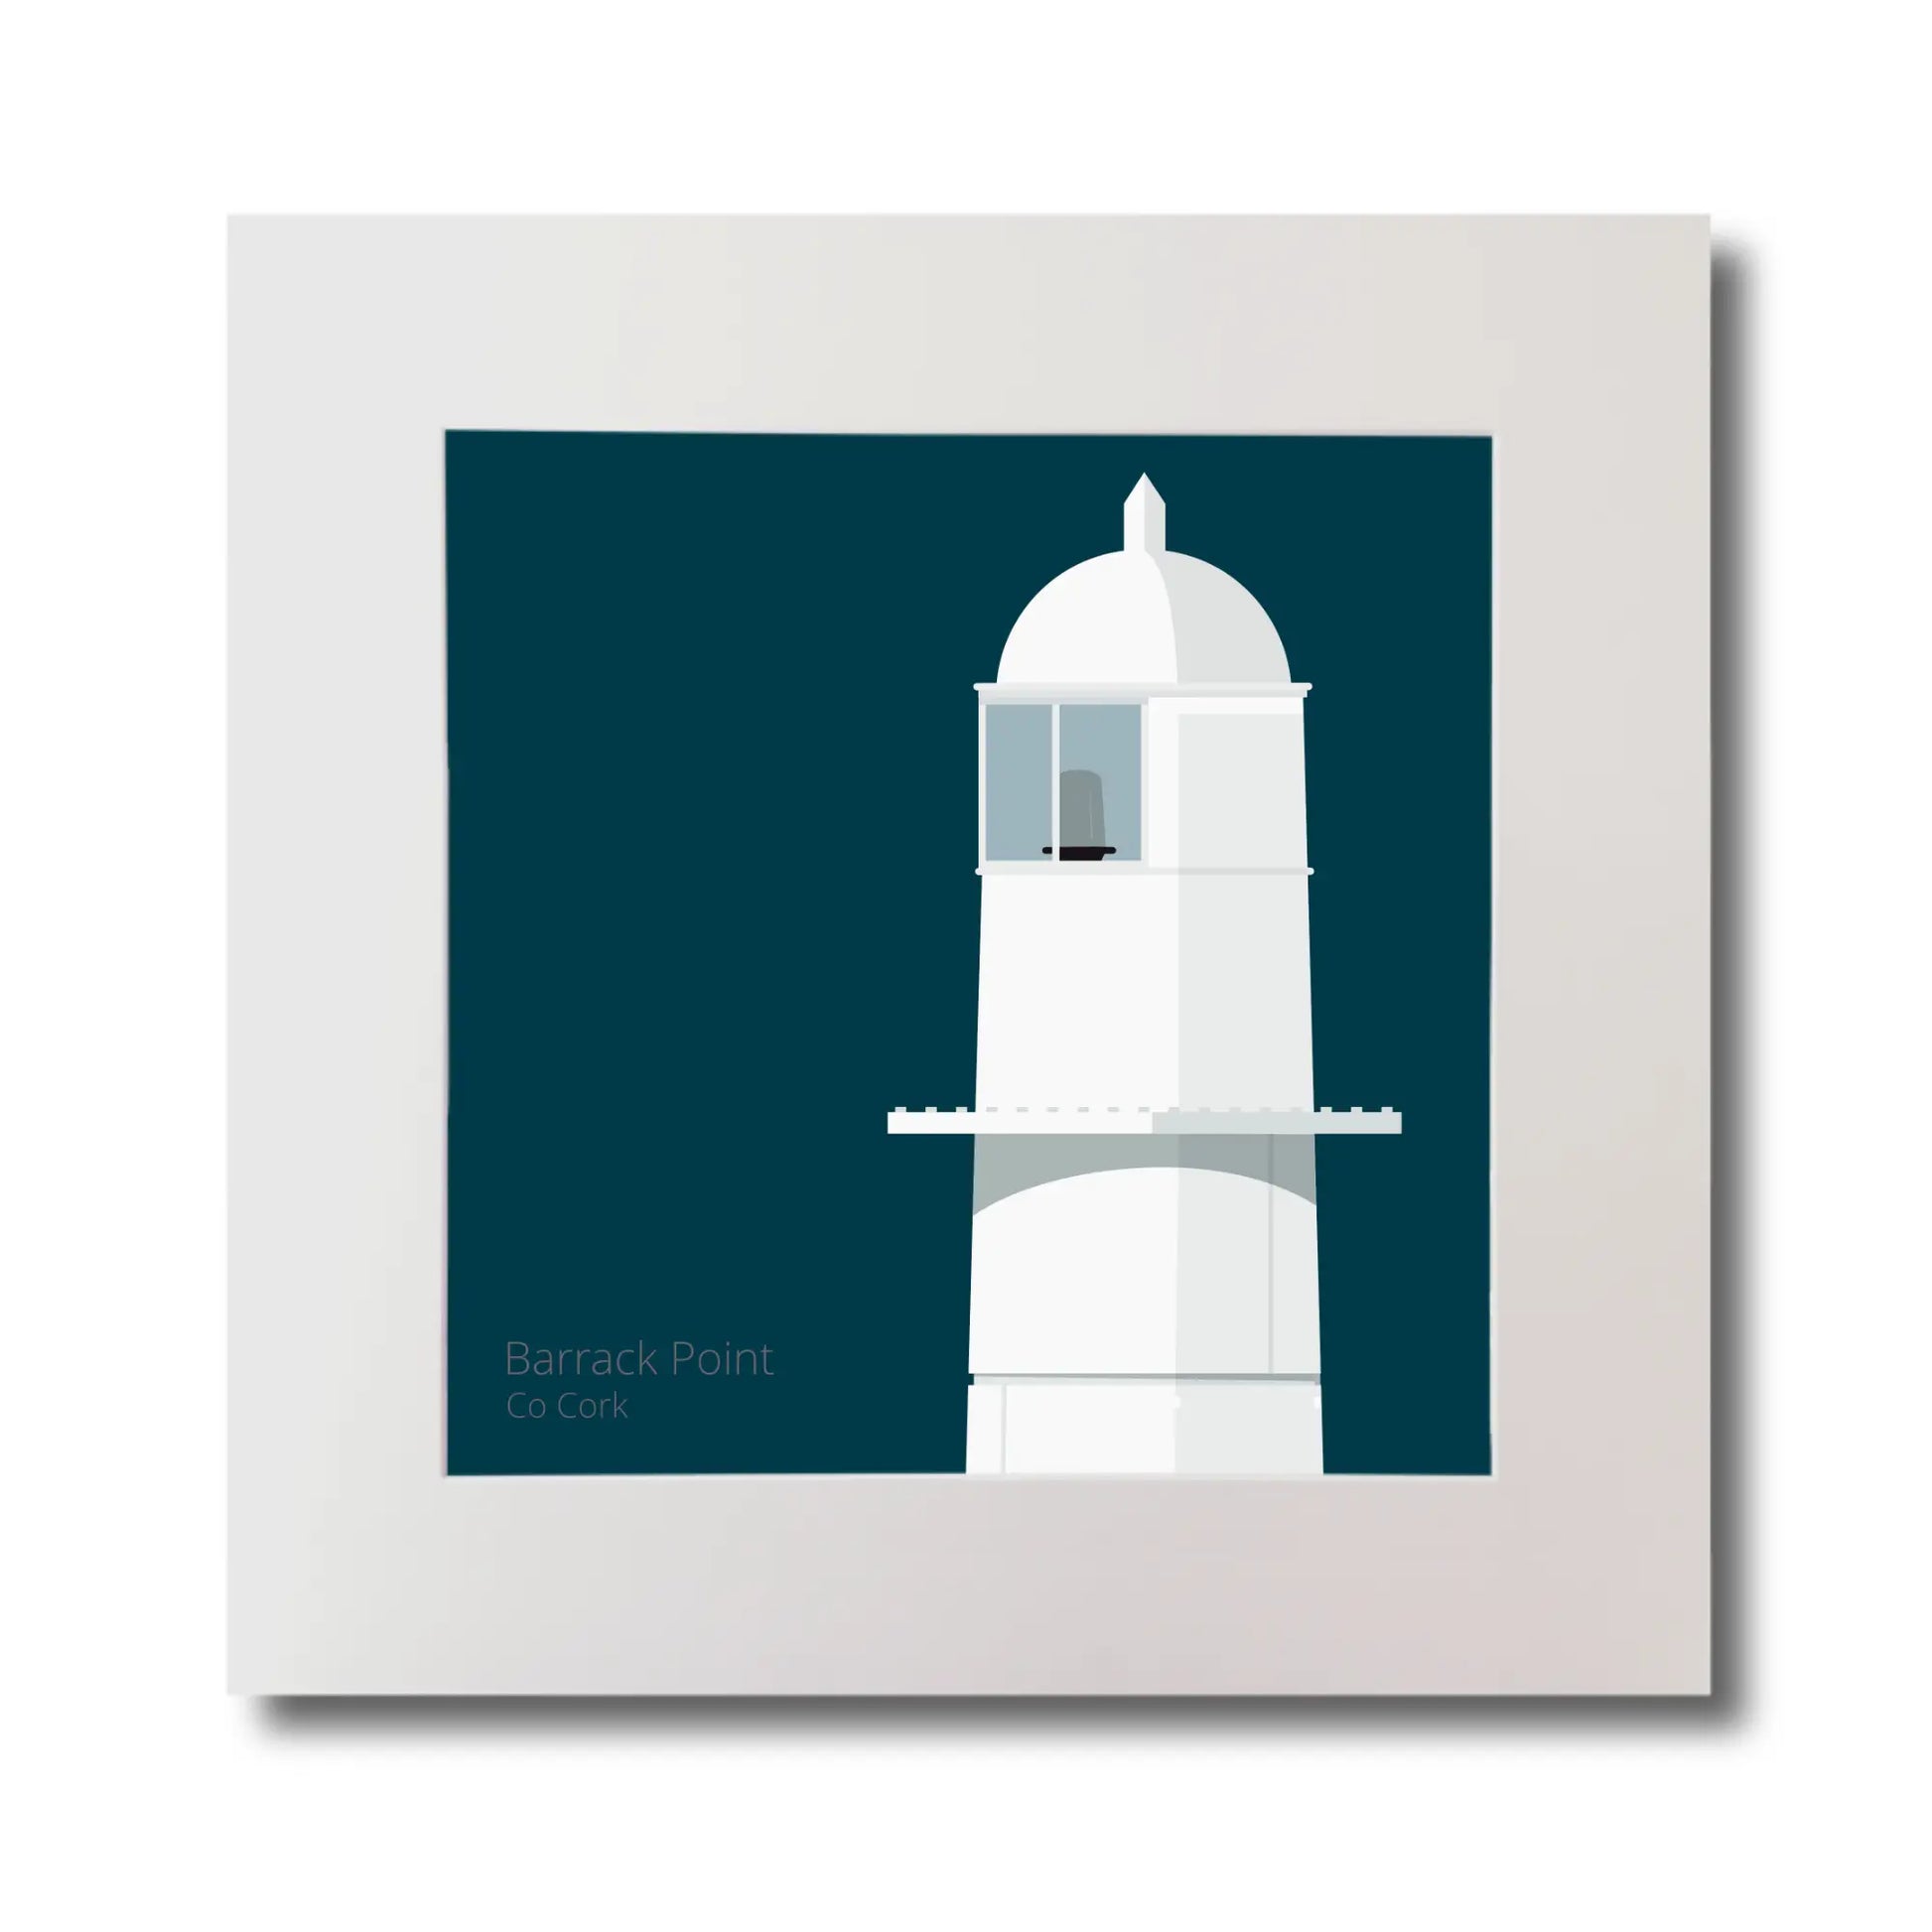 Illustration of Barrack Point lighthouse on a midnight blue background, mounted and measuring 30x30cm.